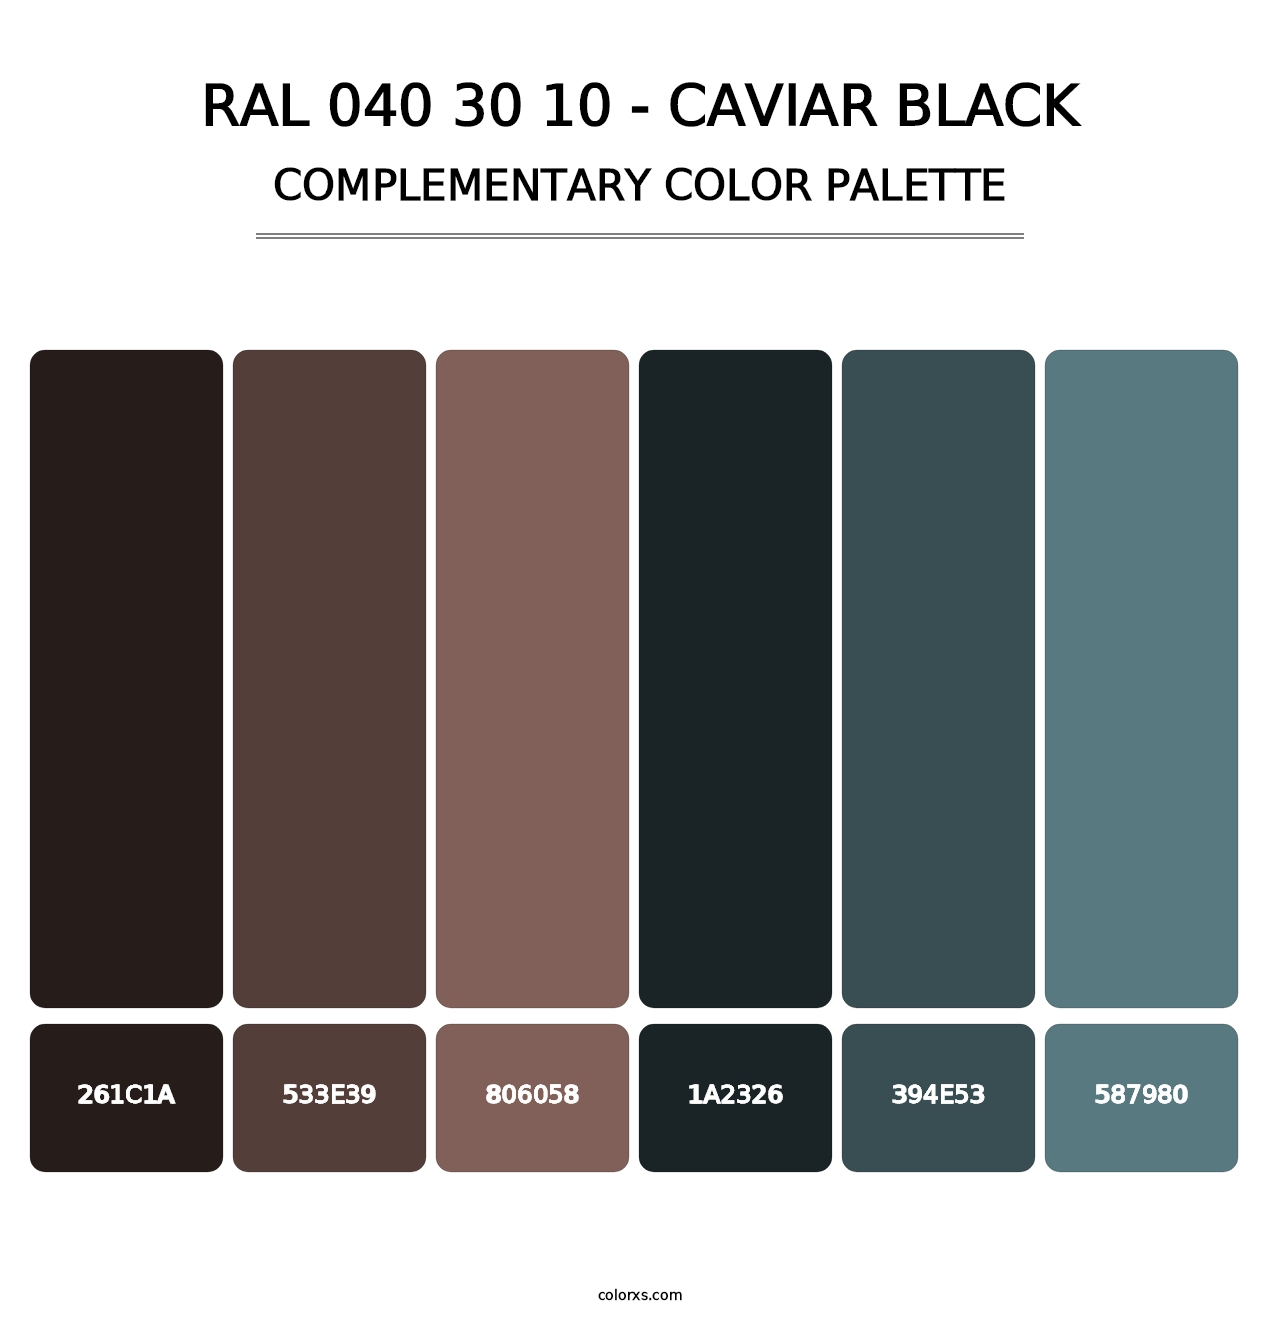 RAL 040 30 10 - Caviar Black - Complementary Color Palette